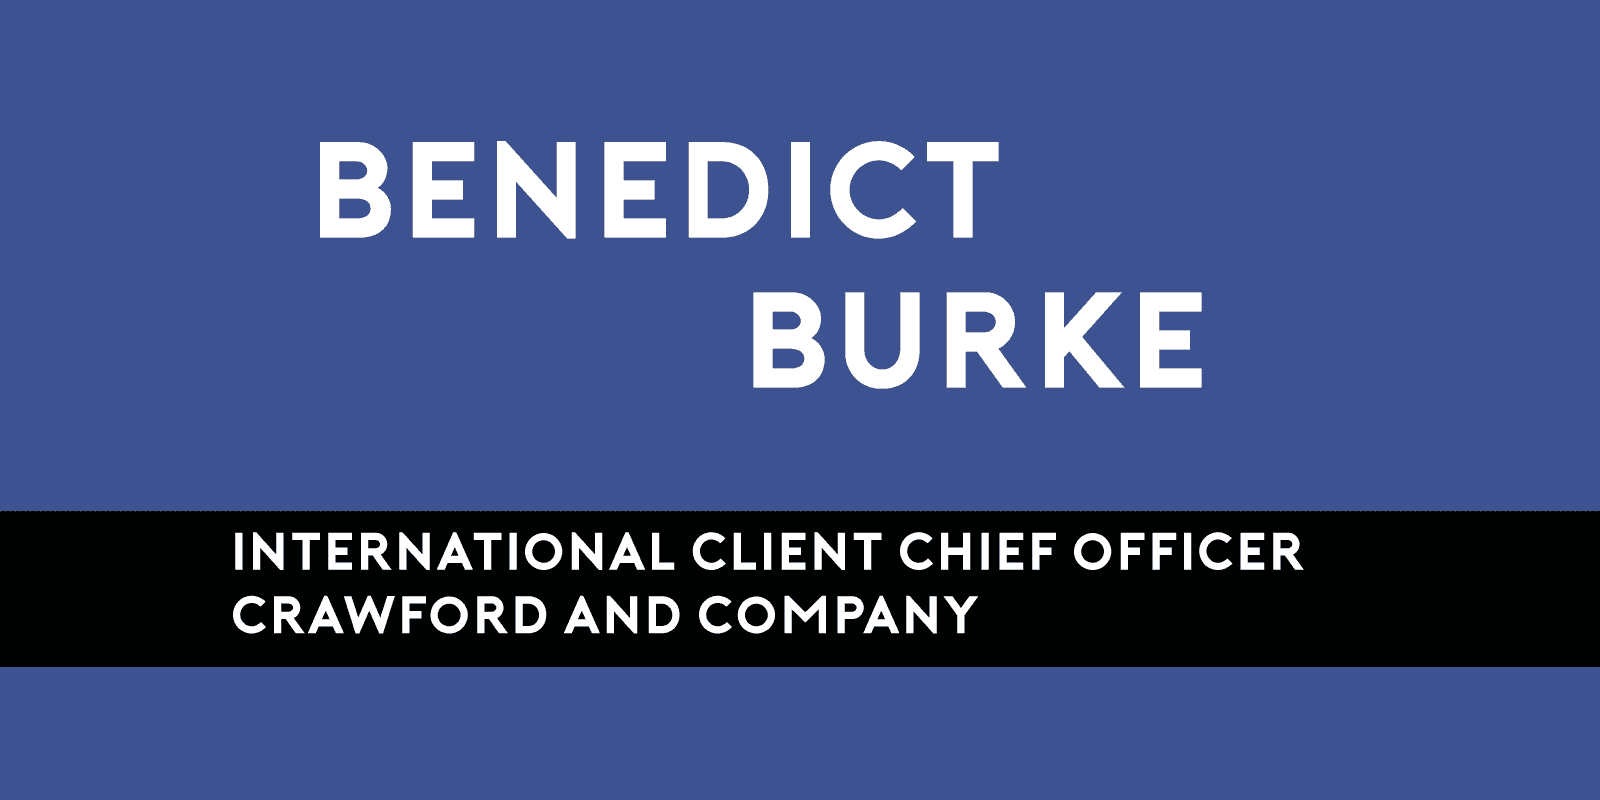 Benedict Burke of Crawford and Company is LegalNet Inc's Thursday Thought Leader